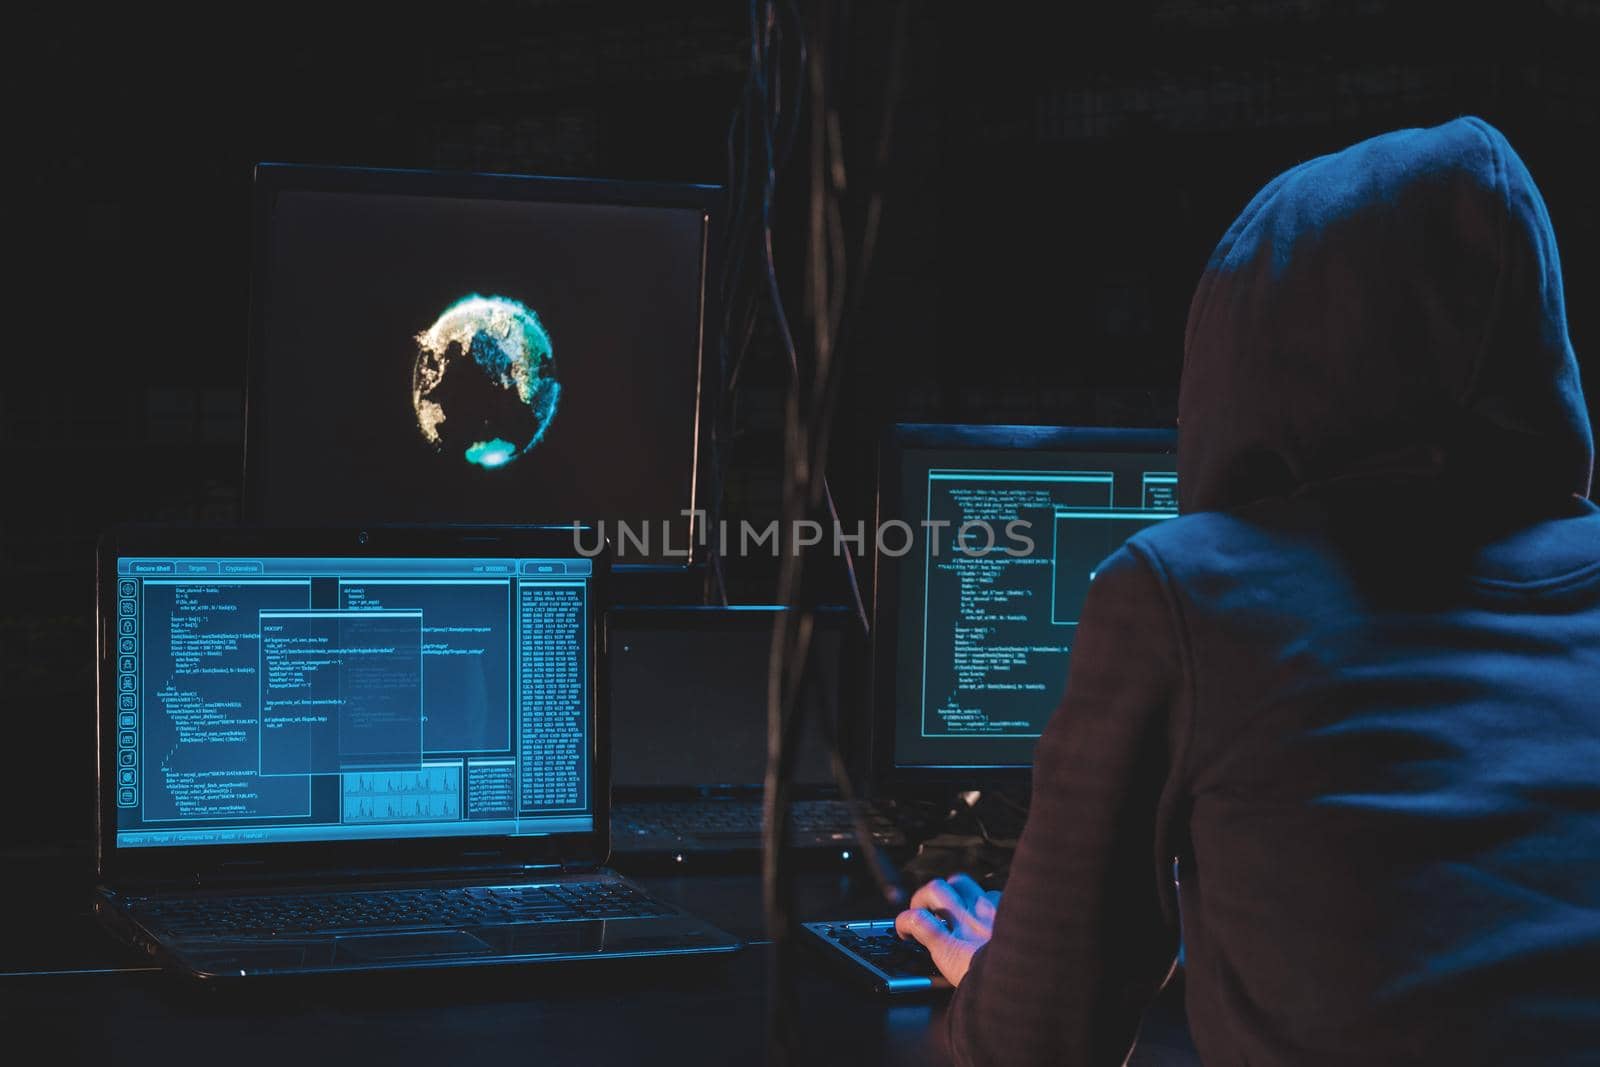 Back hooded hacker using malicious software hack corporate data center. malefactor hidden underground in dark place, multiple displays with phishing code and global map attack. by igor010